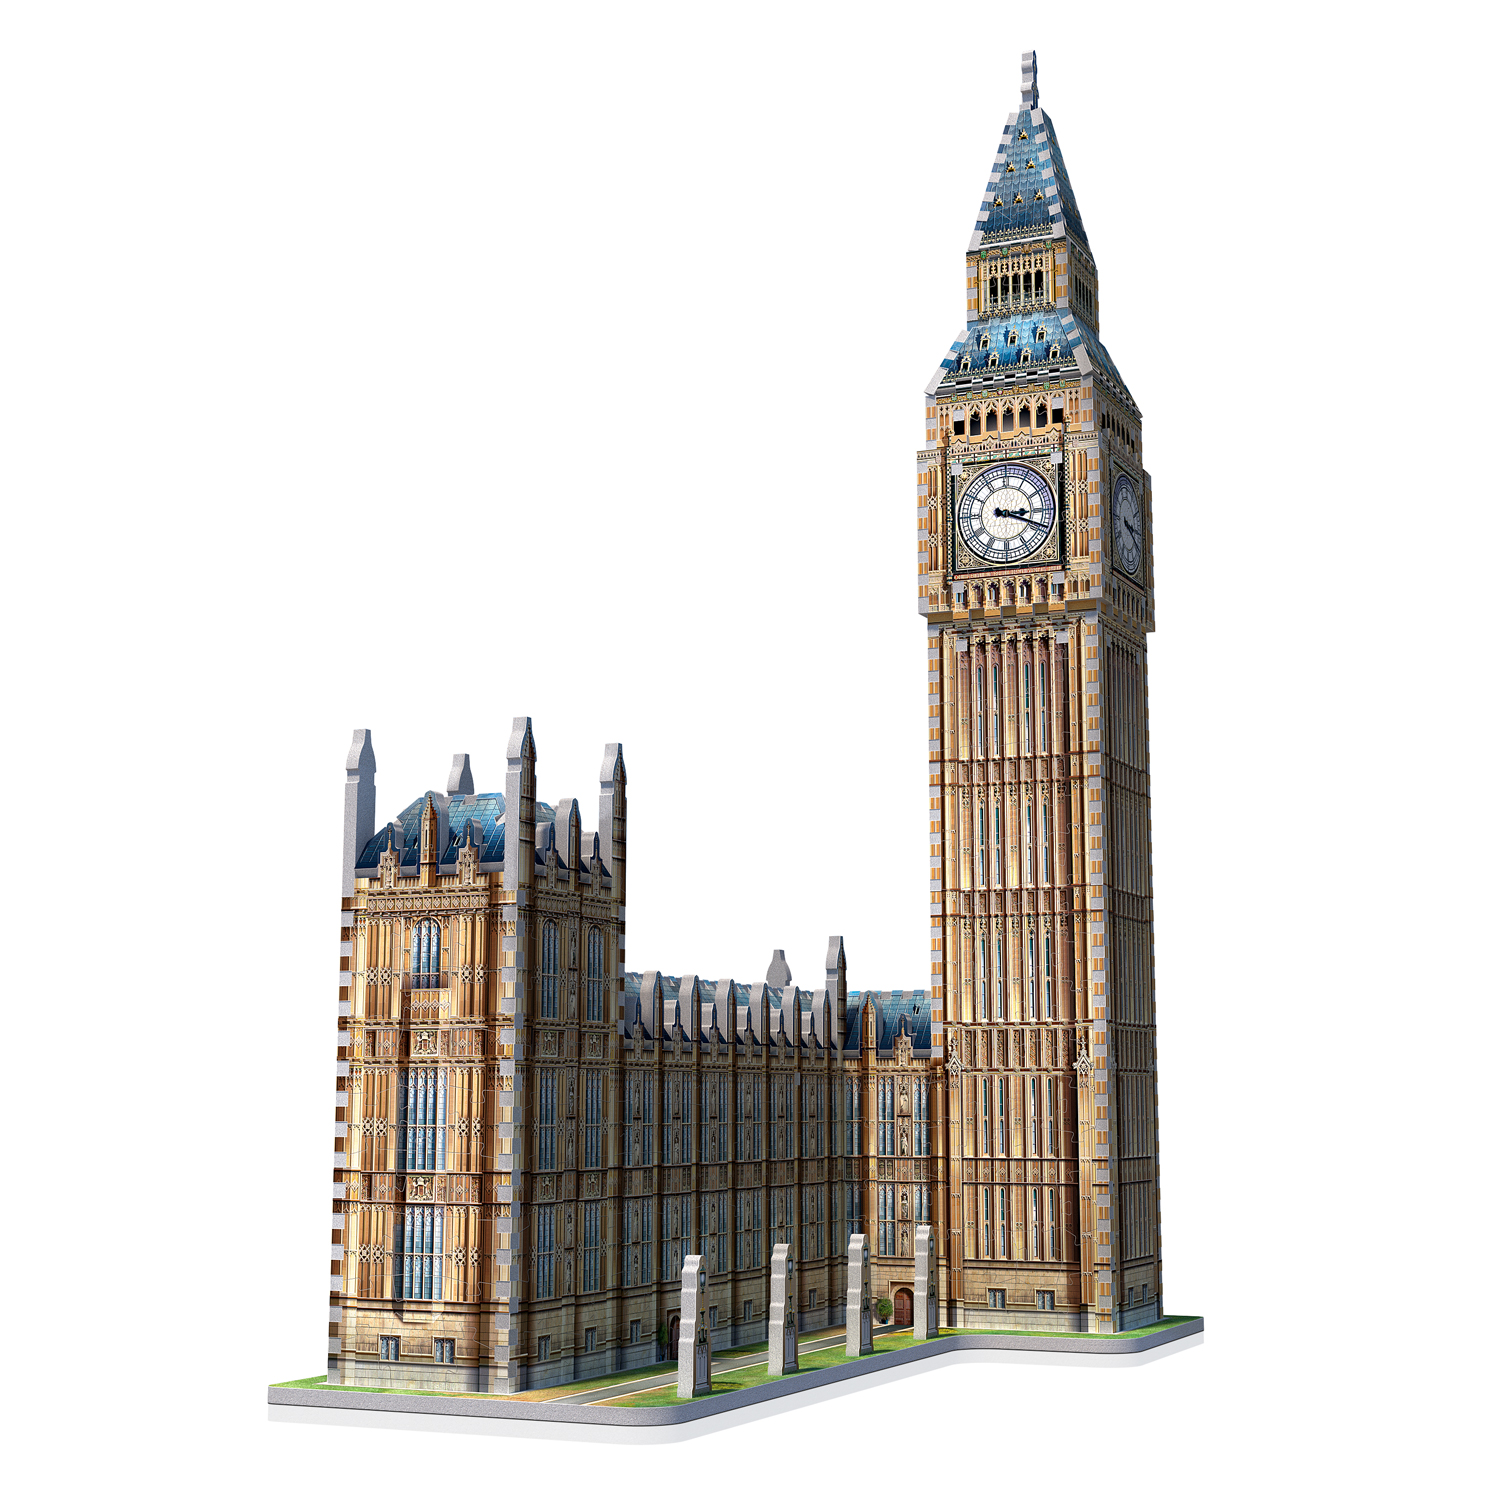 Large 3D Puzzle Jigsaw Set Big Ben Westminster Eiffel Leaning Tower Educational